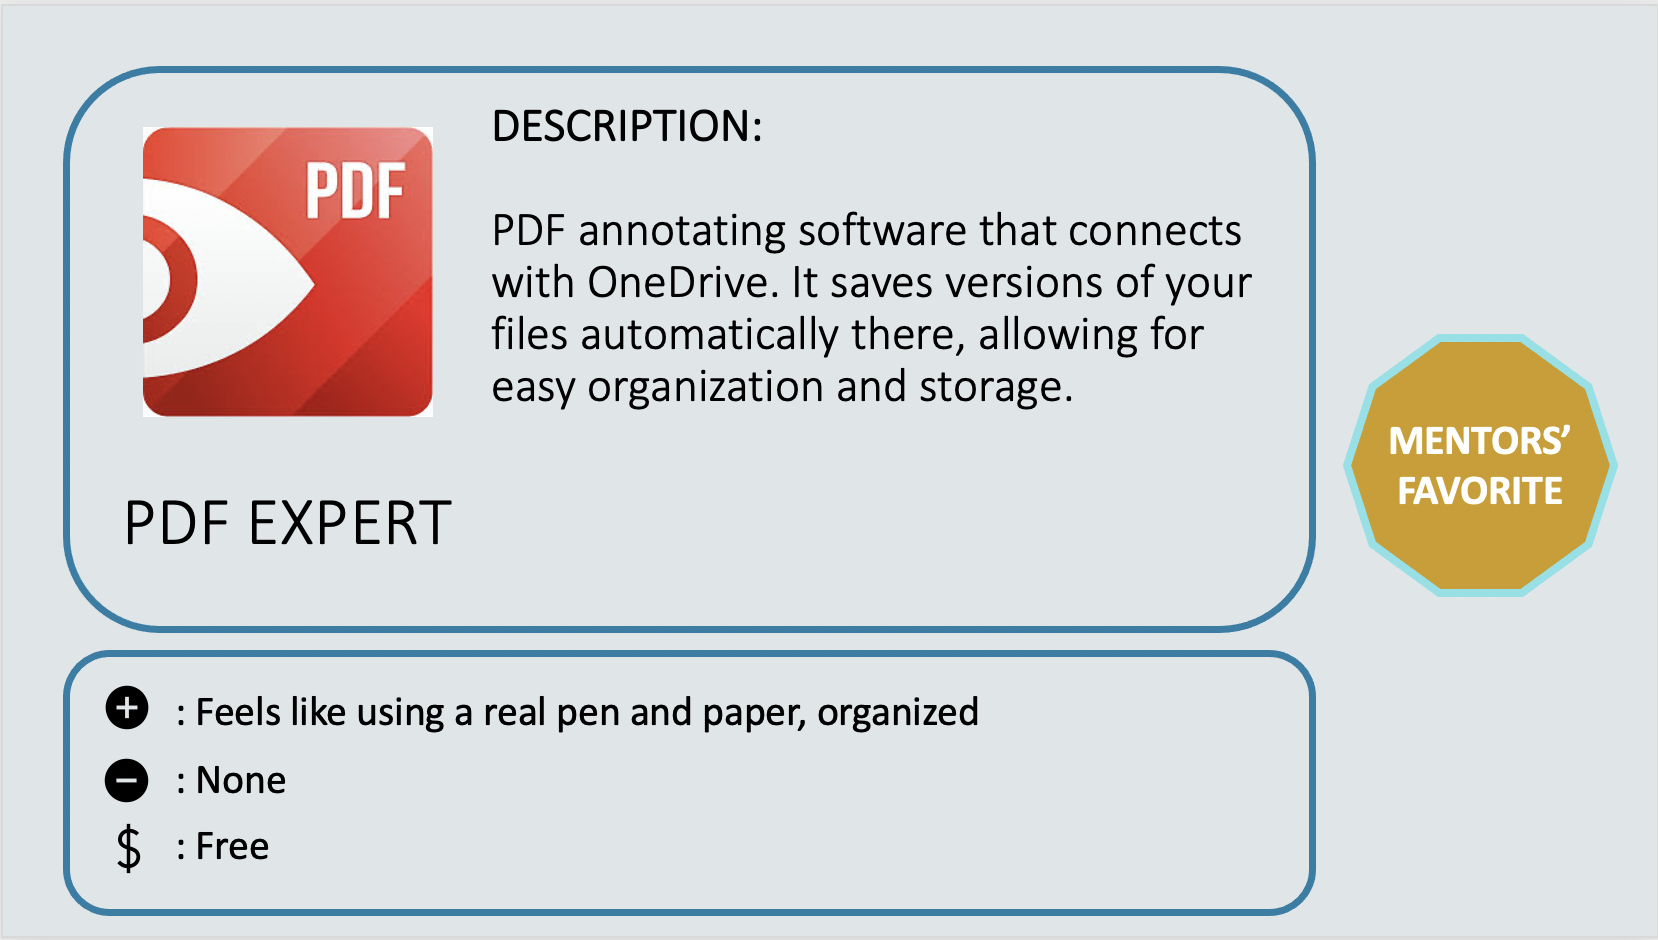 PDF EXPERT - Mentor's Favorite. PDF annotating software that connects with OneDrive. It saves versions of your files automatically there, allowing for easy organization and storage. + Feels like using a real pen and paper, organized. - None. $ - Free